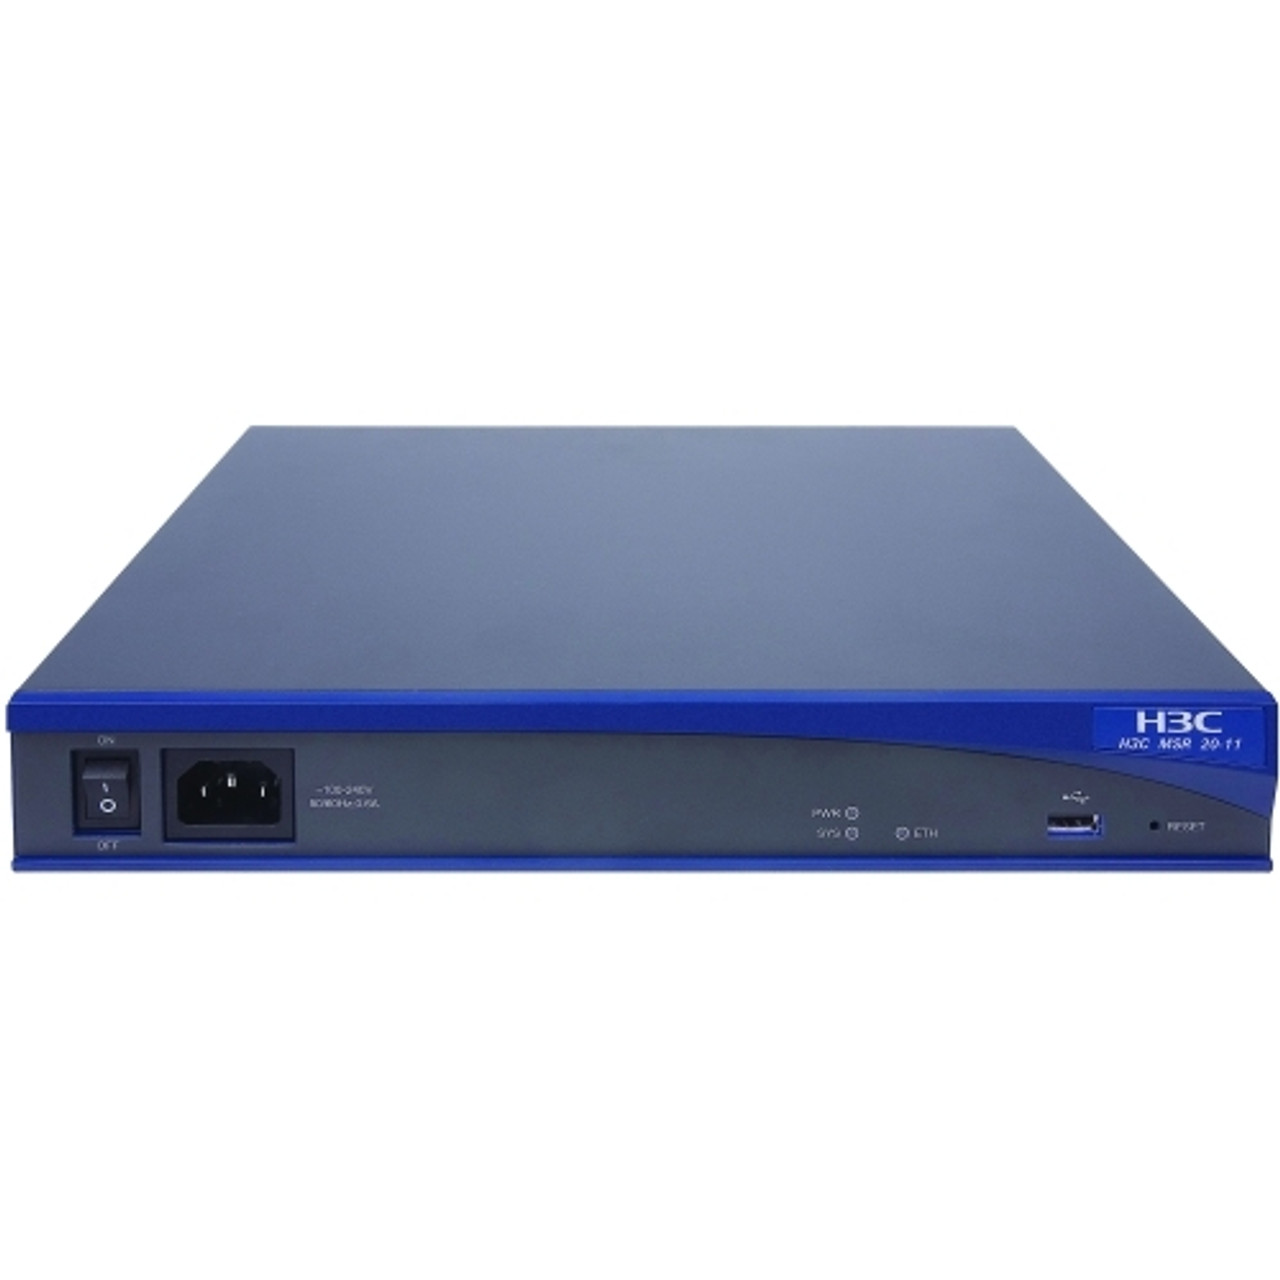 JF234A HP A-MSR30-16 PoE Multi-Service Router (Refurbished)